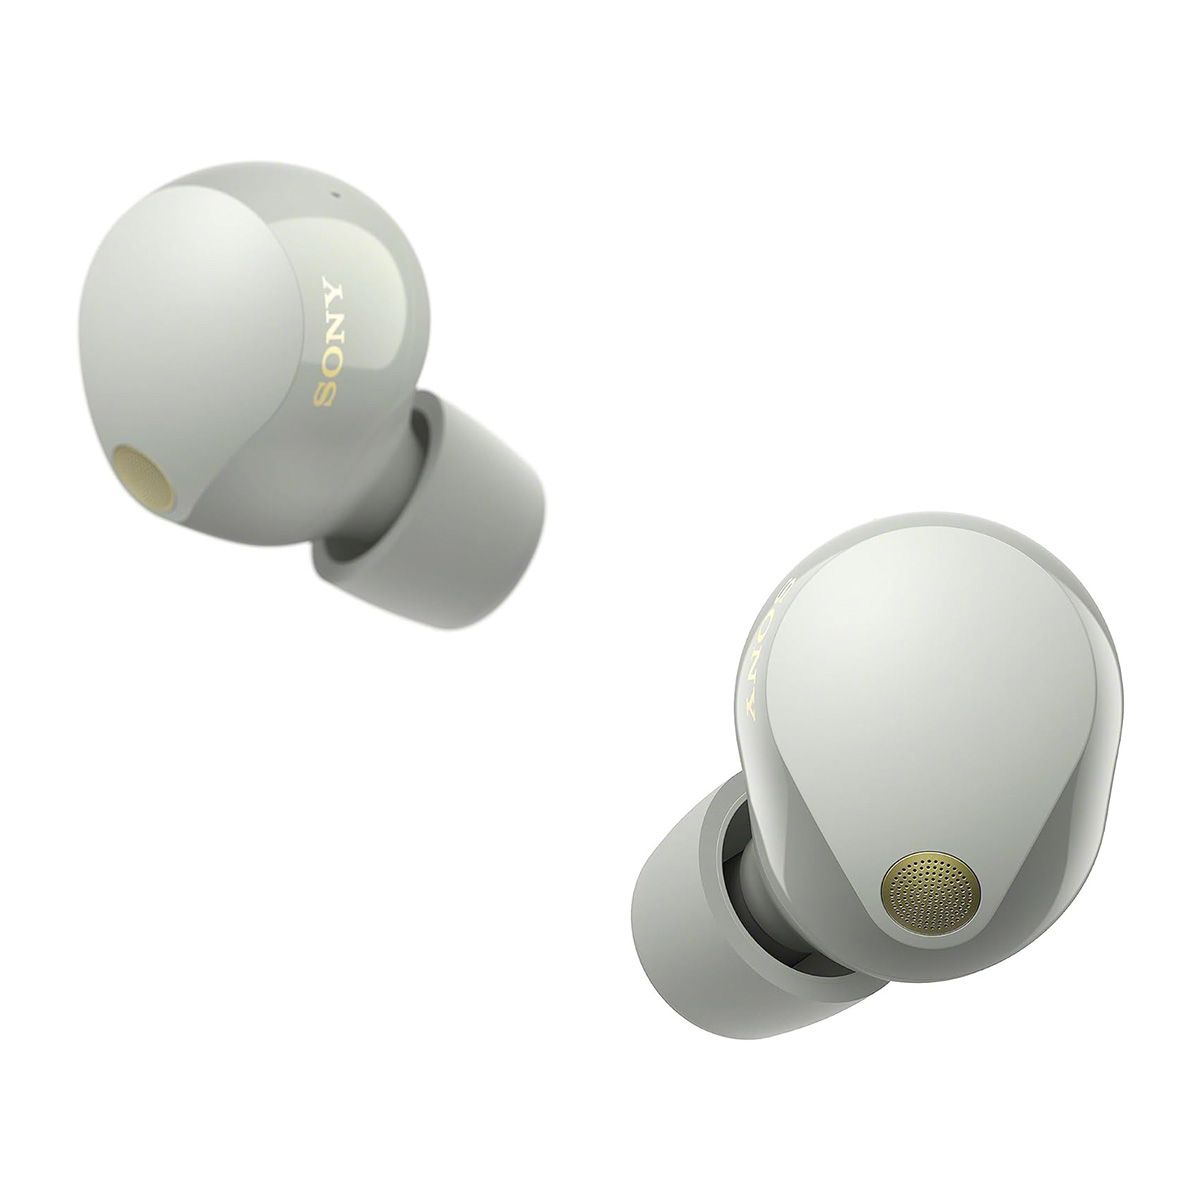 Sony WF-1000XM5 Truly Wireless Noise Canceling Earbuds - silver - front angled view of two earbuds